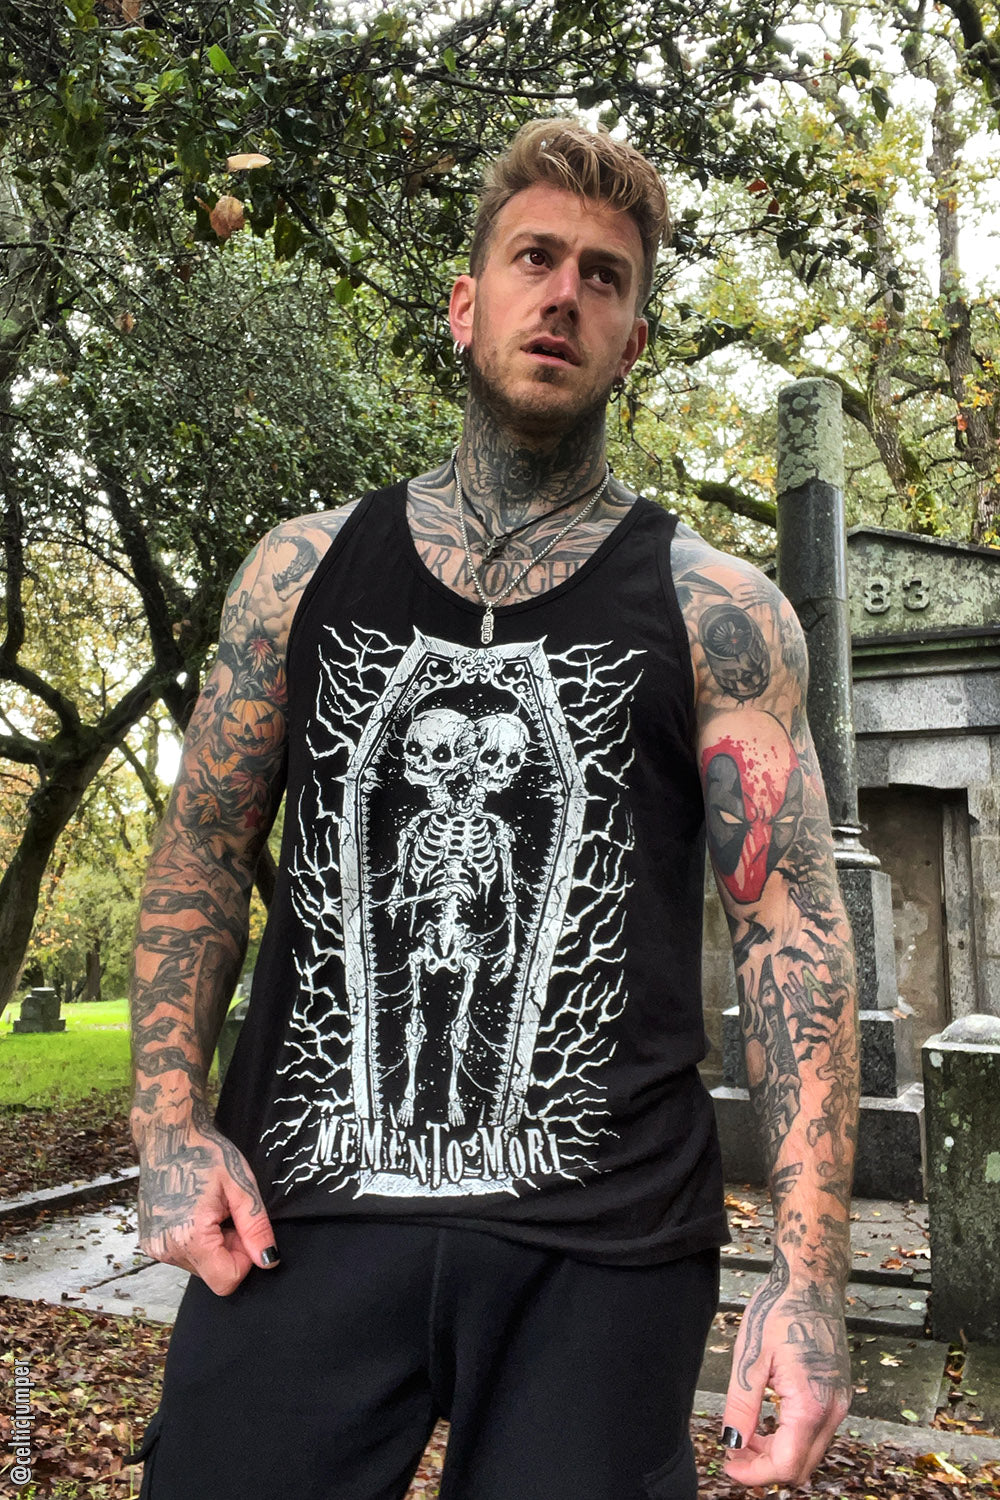 Memento Mori Conjoined Skeleton Twins Tee [Multiple Styles Available]